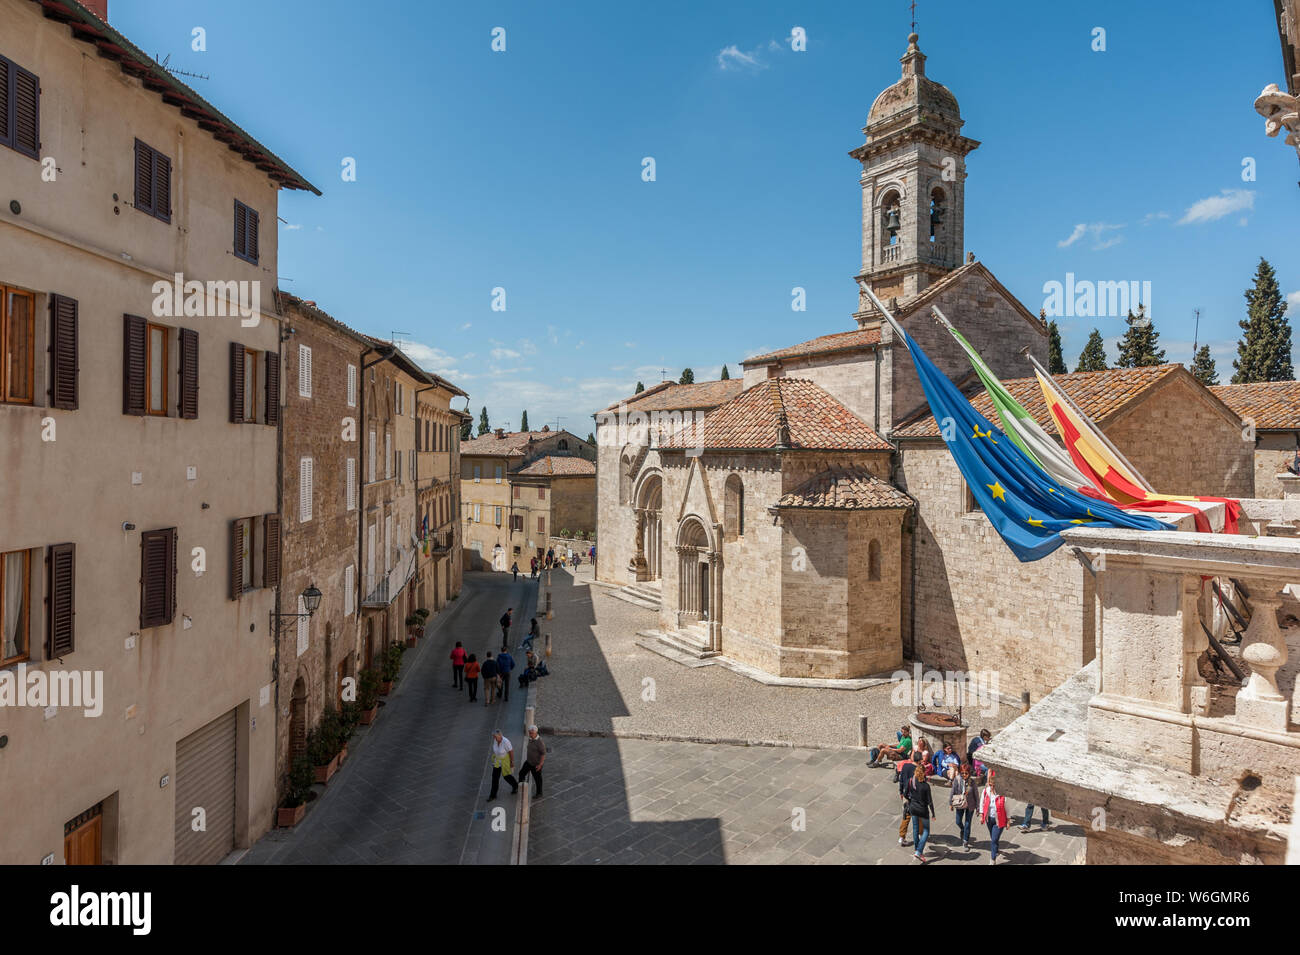 The romanic church of San Quirico d’Orcia, in the province of Siena, Tuscany, Italy Stock Photo